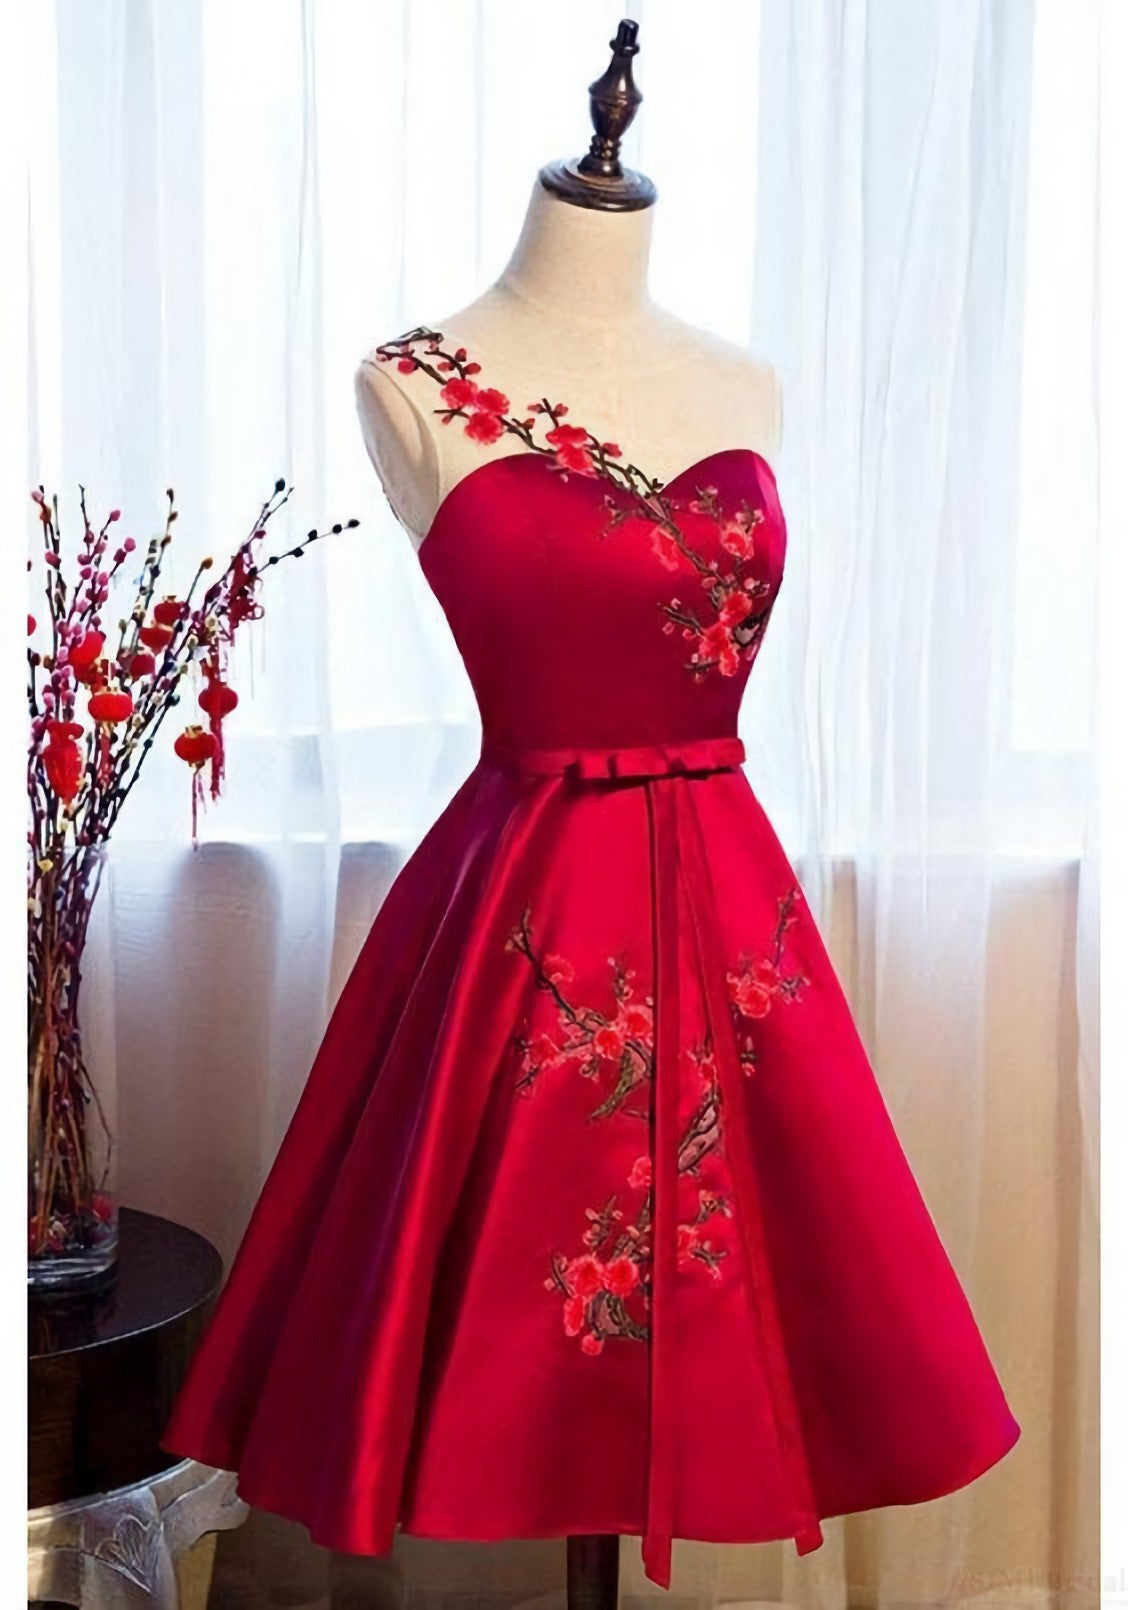 Burgundy Satin Corset Homecoming Dresses, With Applique Gowns, Prom Dress Backless